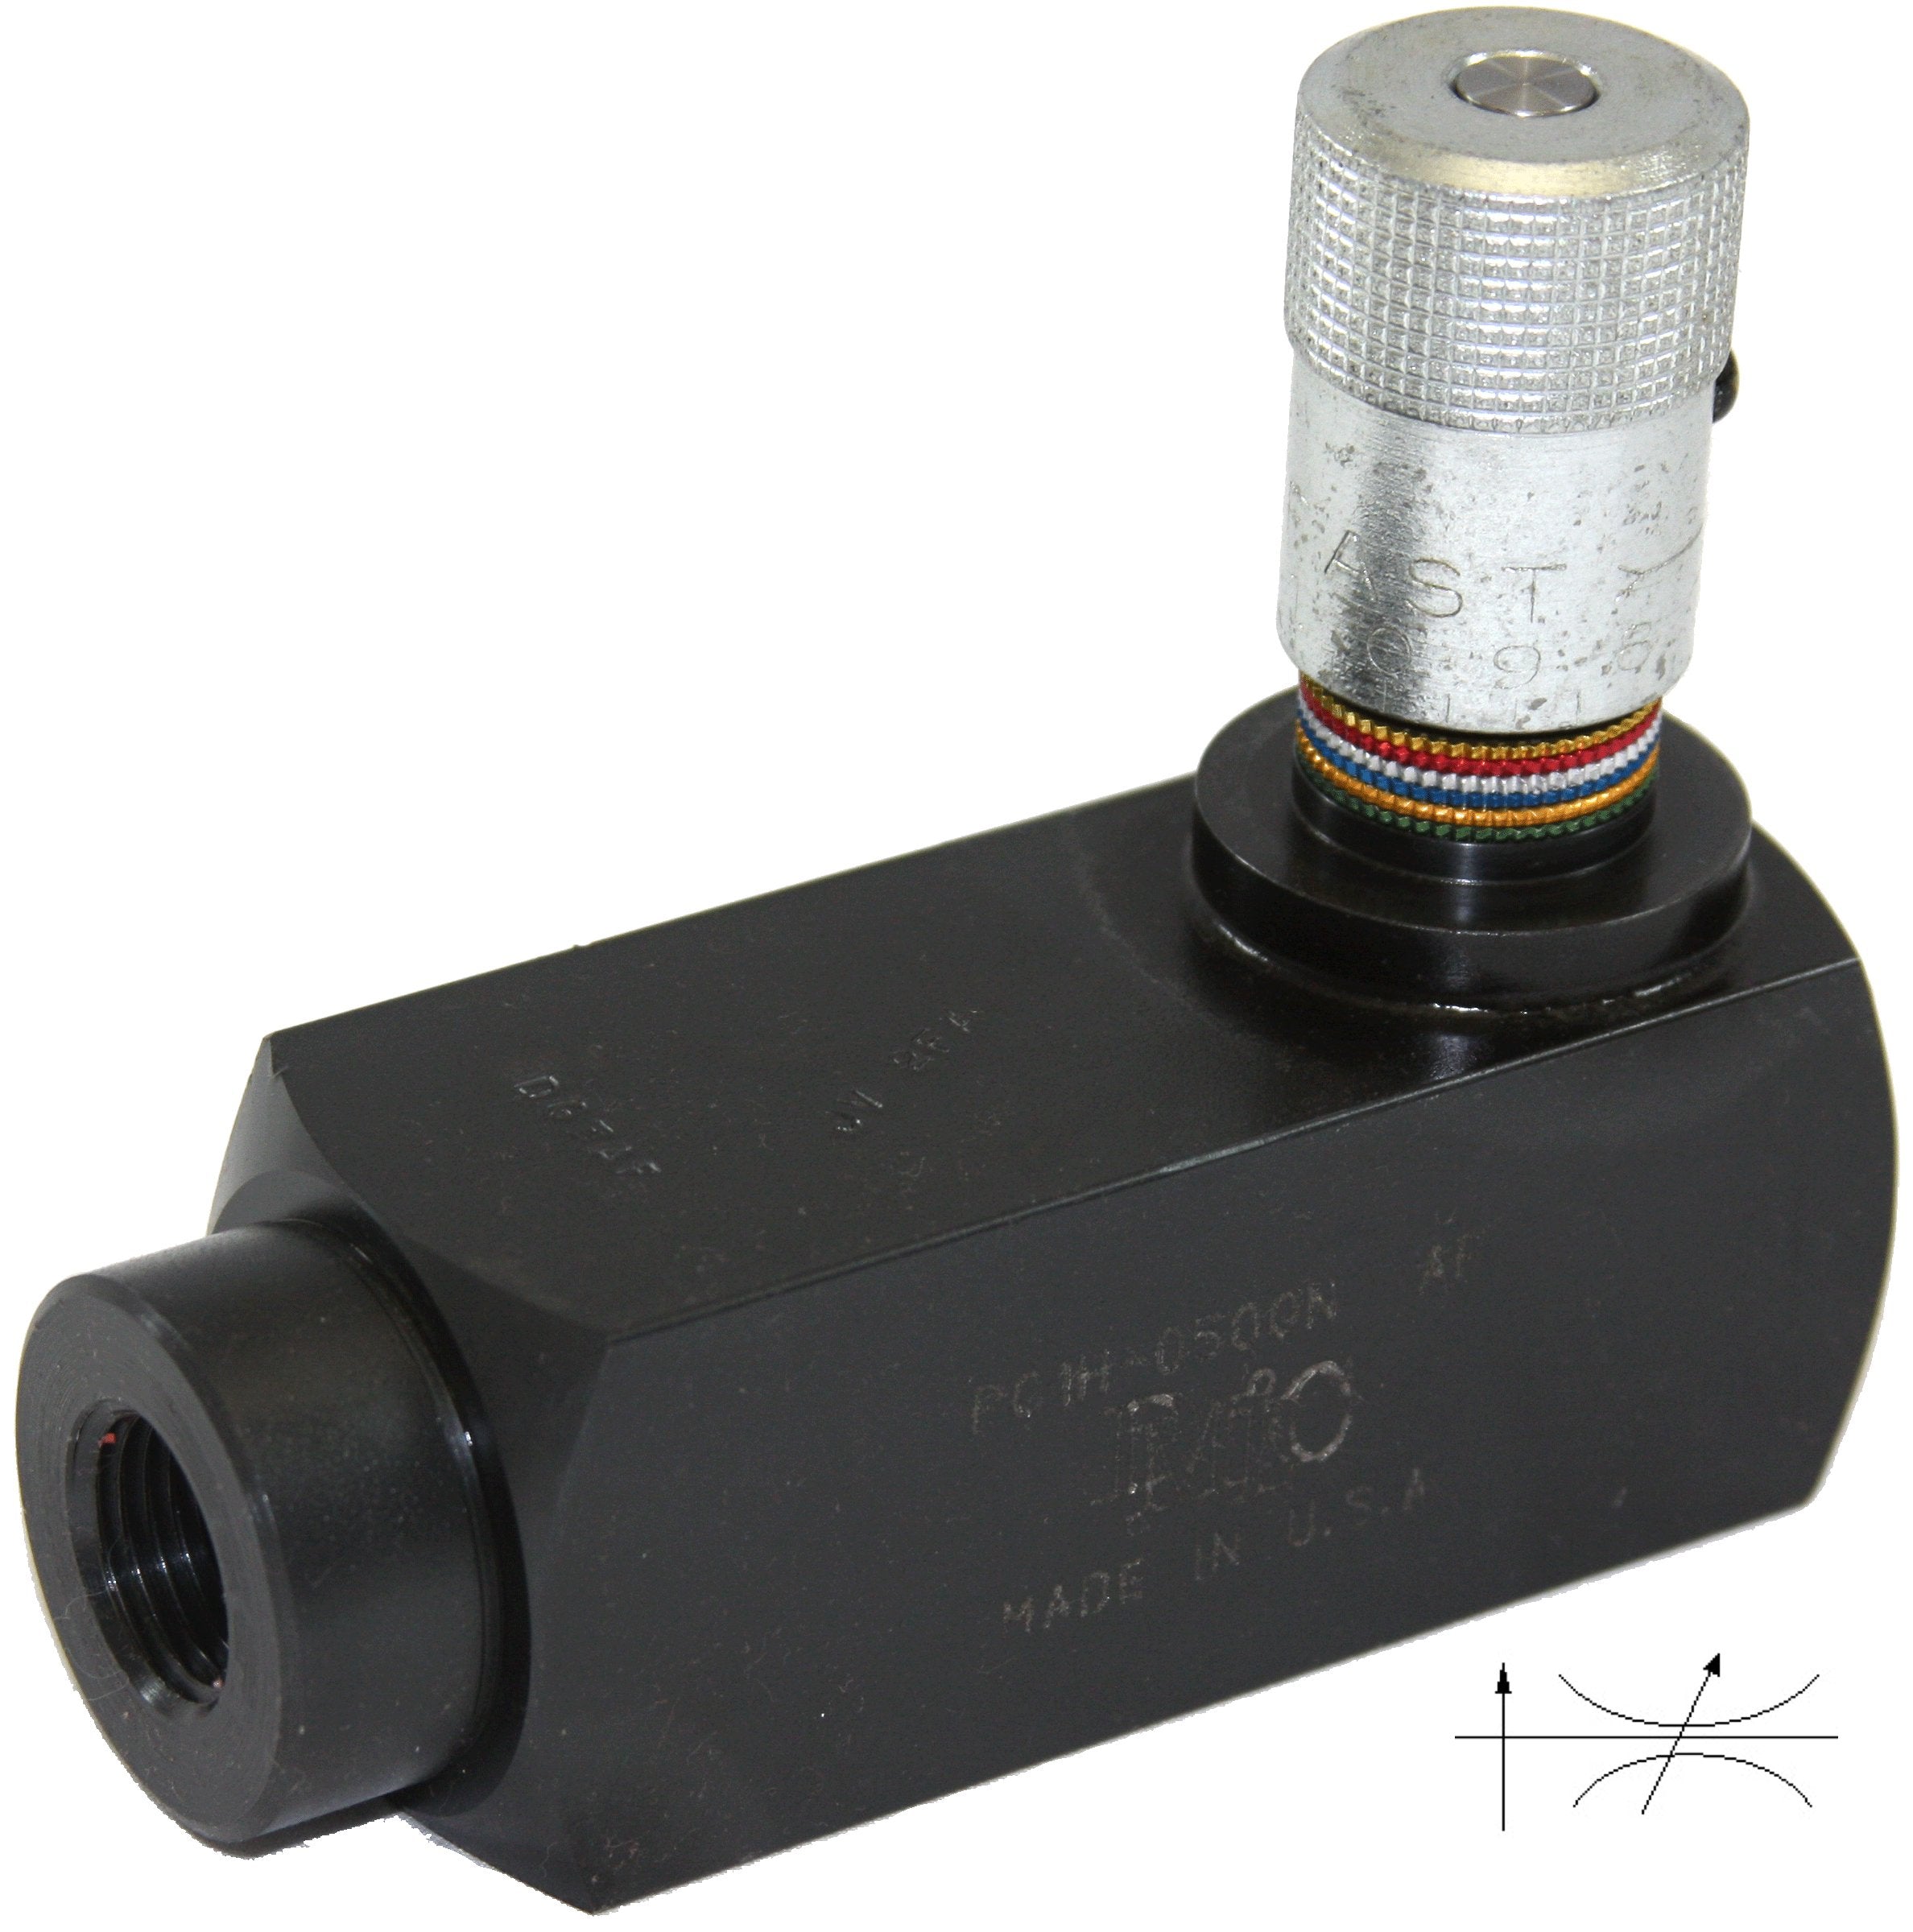 PC1H-1000N : DMIC Pressure Comp Flow Control, Unidirectional, Metered, with Check, 1" NPT, 3000psi, Carbon Steel